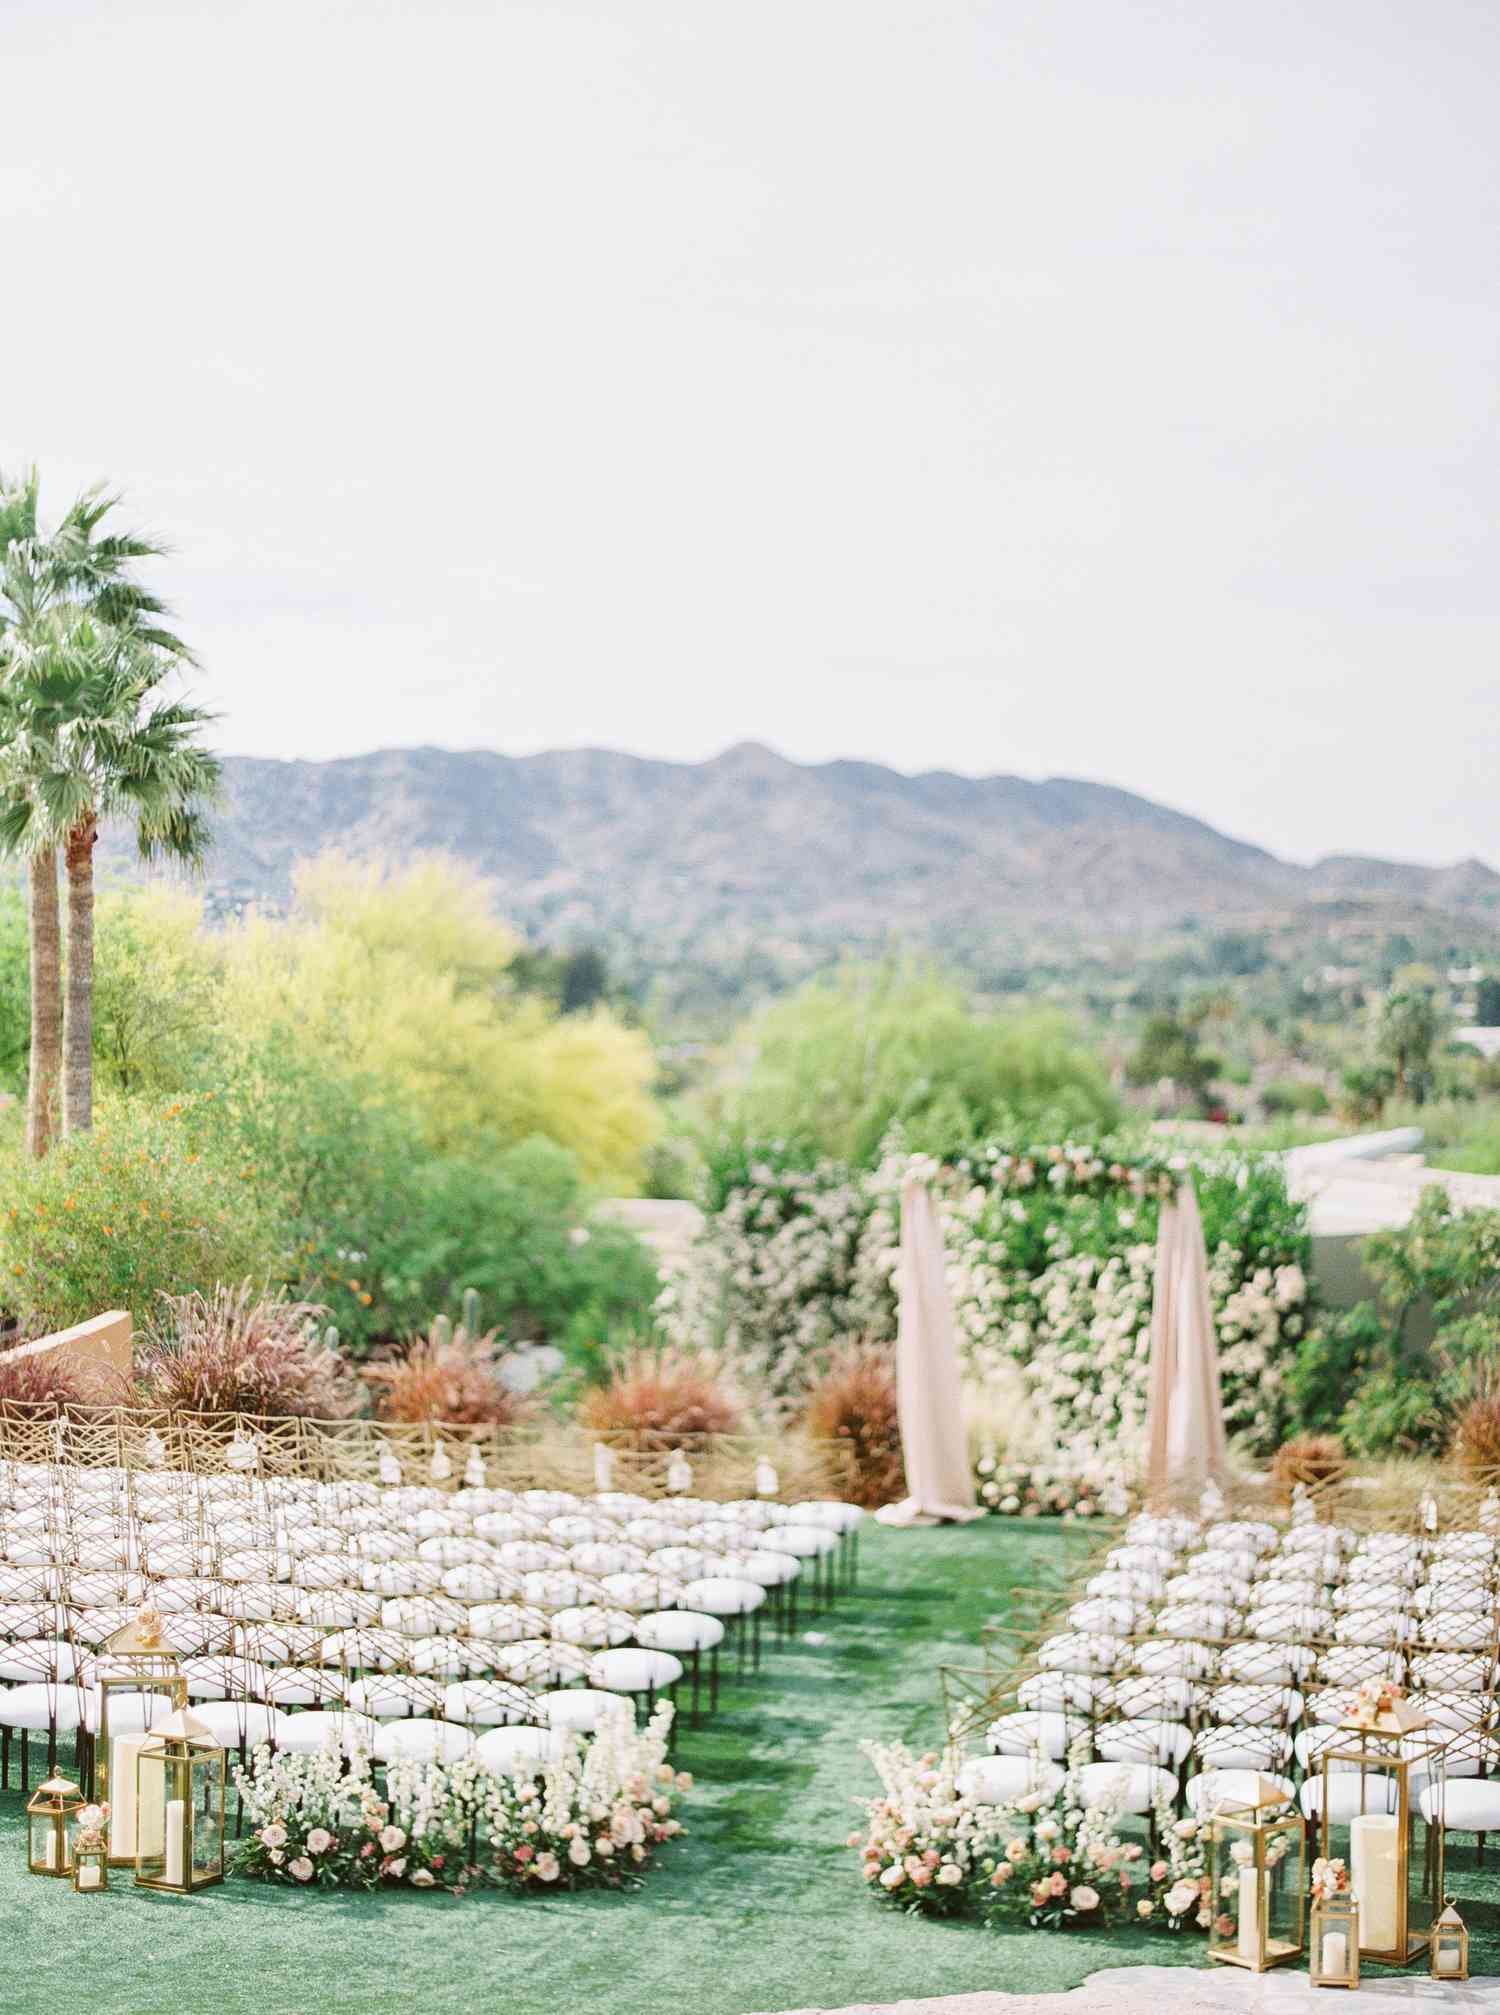 Ceremony aisle on green grass with view of mountain and trees in background